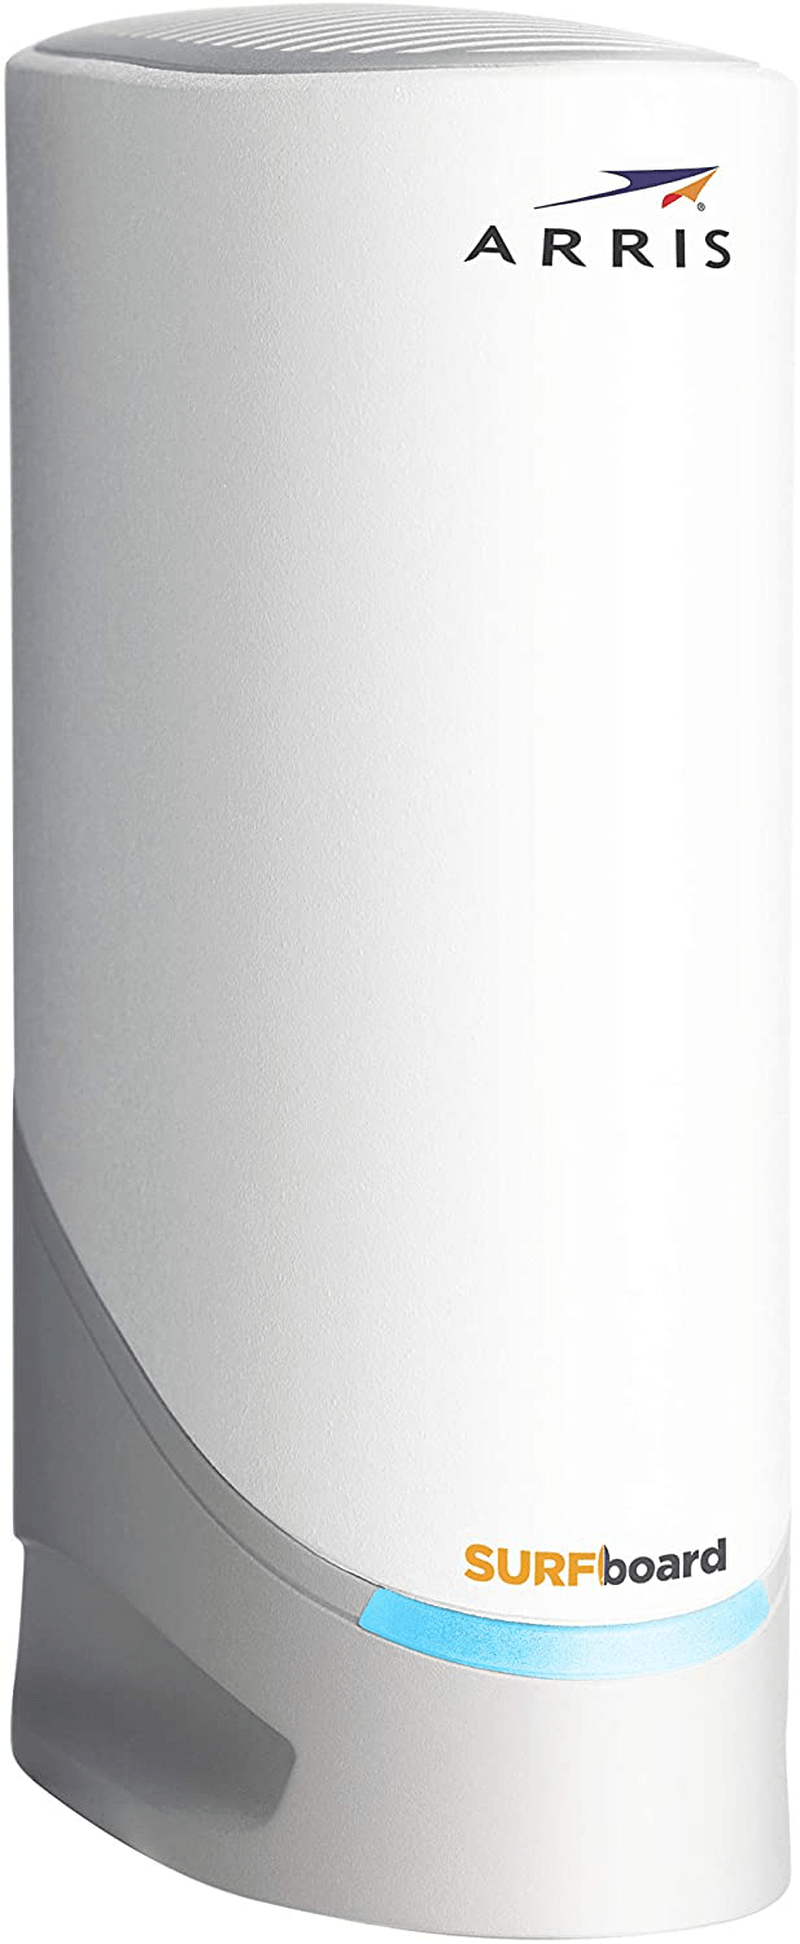 ARRIS Surfboard S33 DOCSIS 3.1 Multi-Gigabit Cable Modem with 2.5 Gbps Ethernet Port, Approved for Cox, Xfinity, Spectrum & Others. Electronics > Networking > Modems ARRIS   